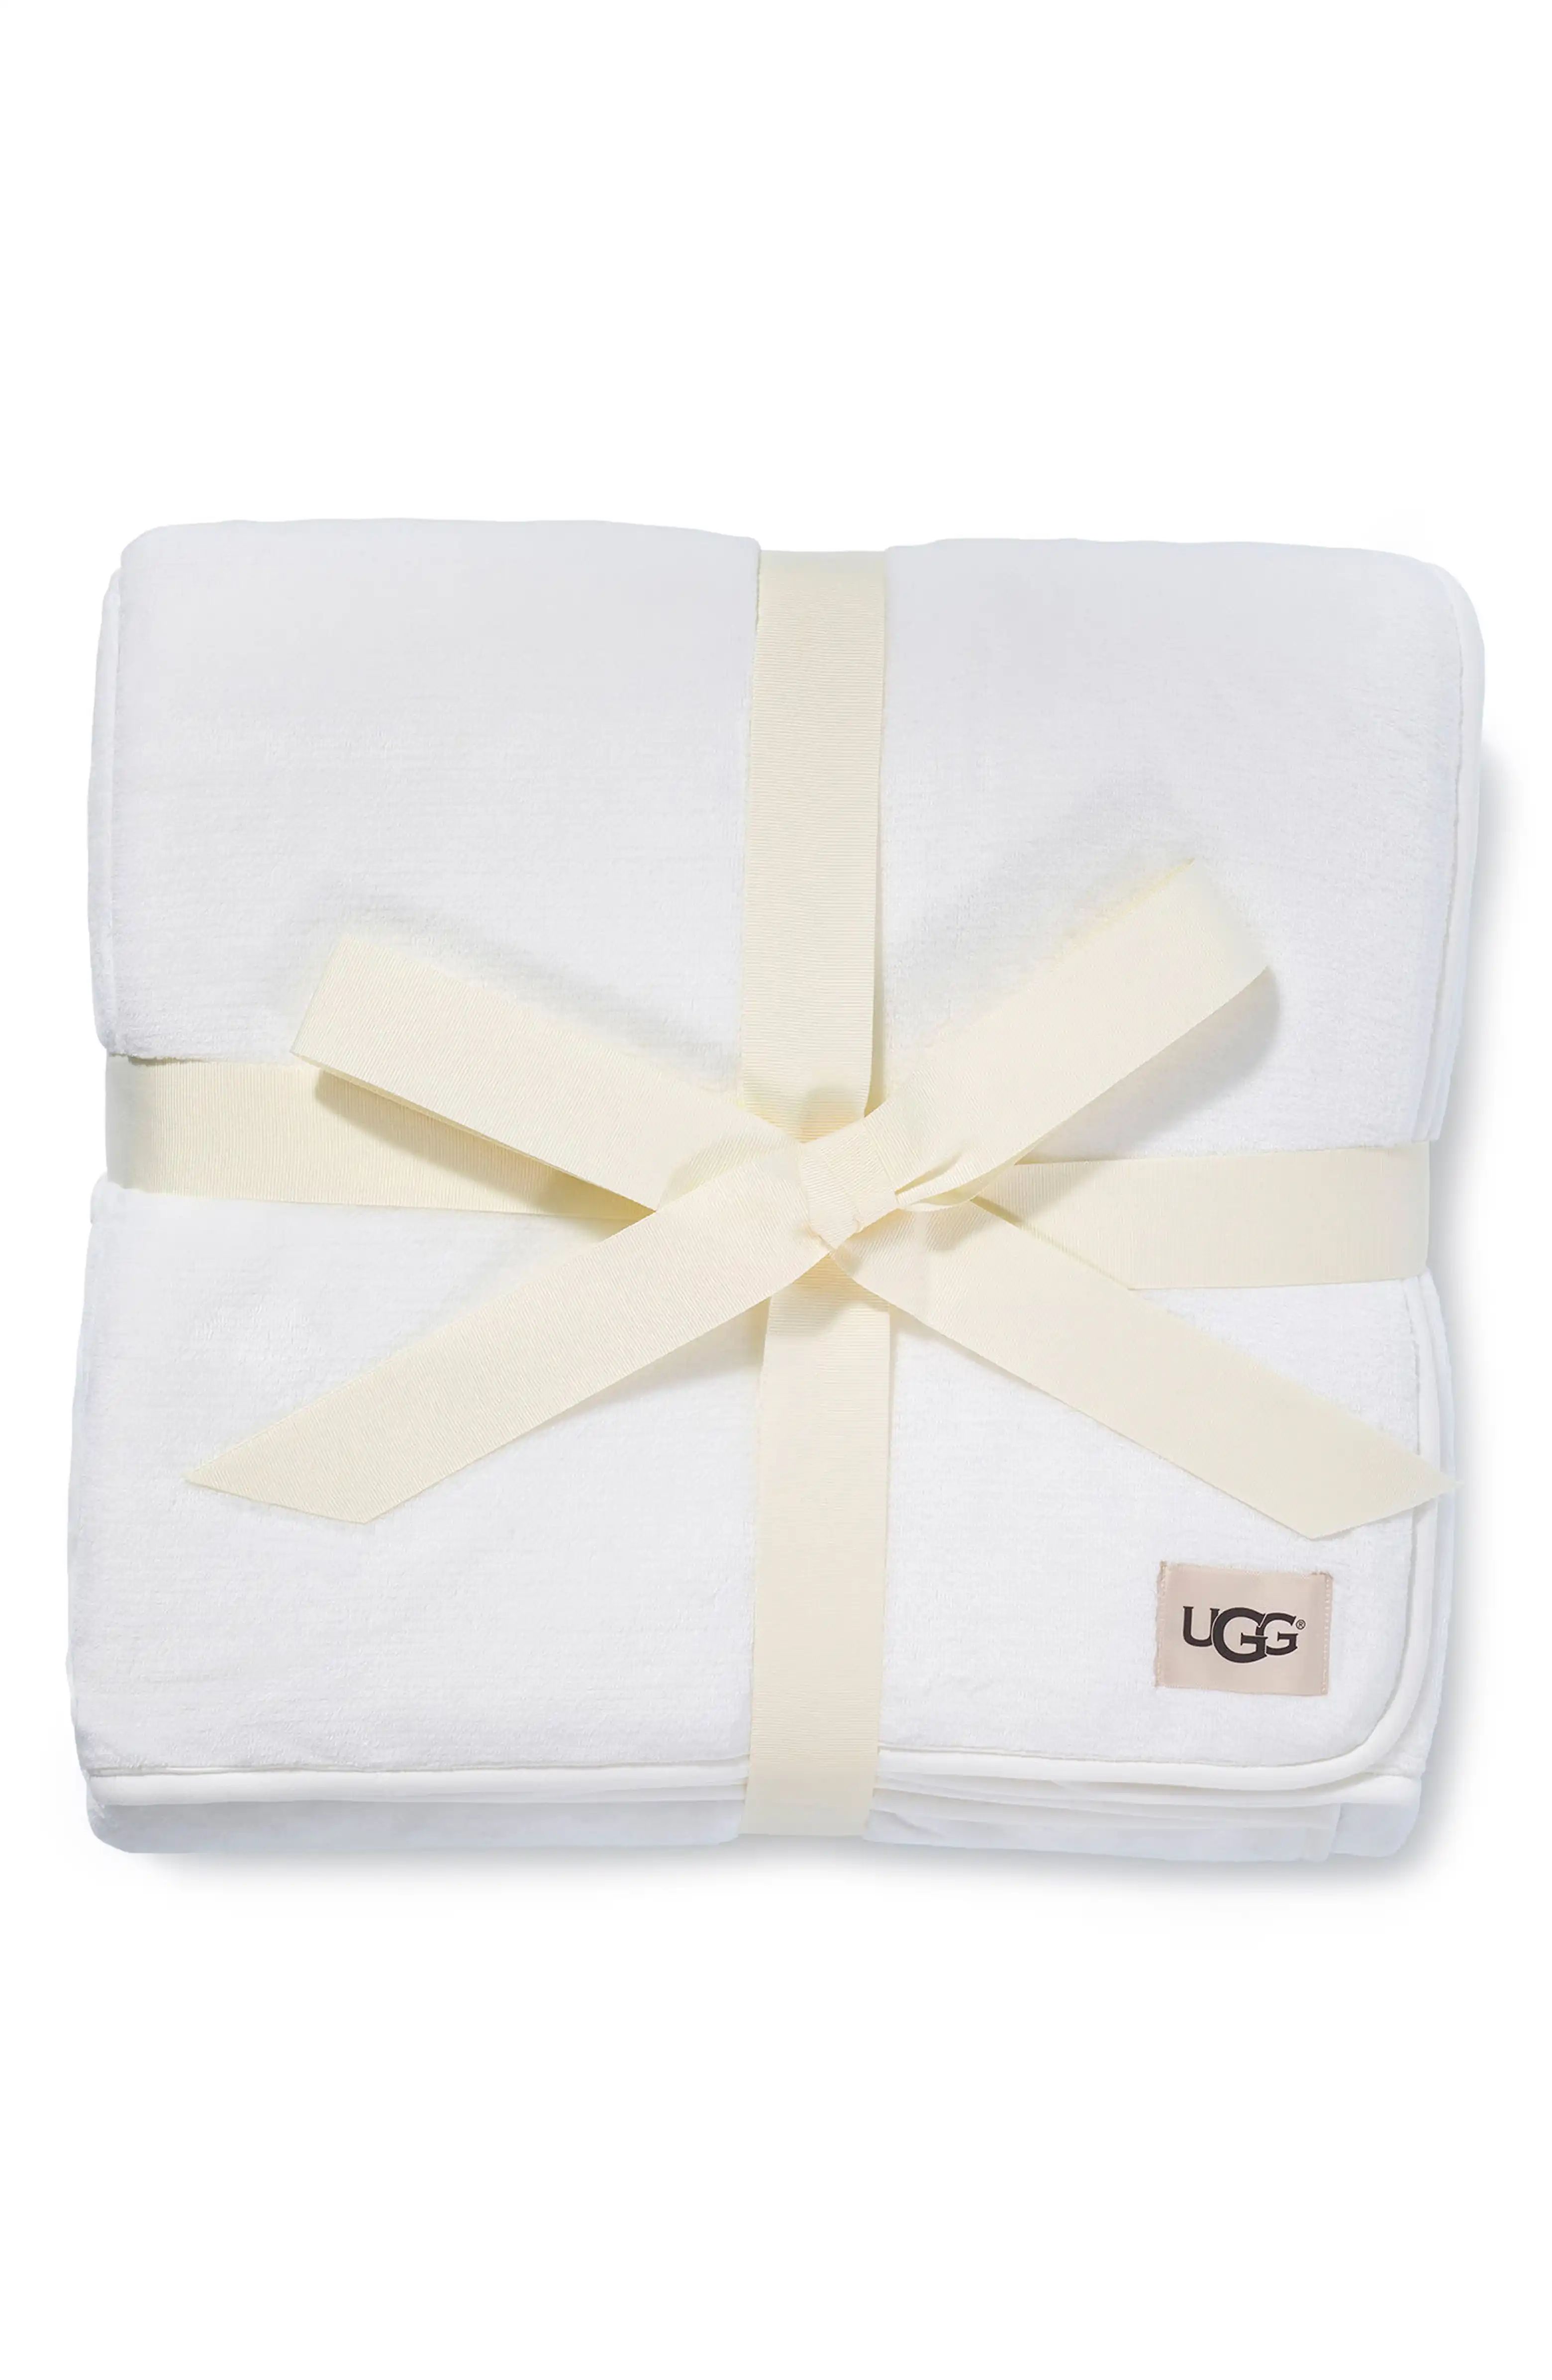 XL Duffield Spa Throw | Nordstrom